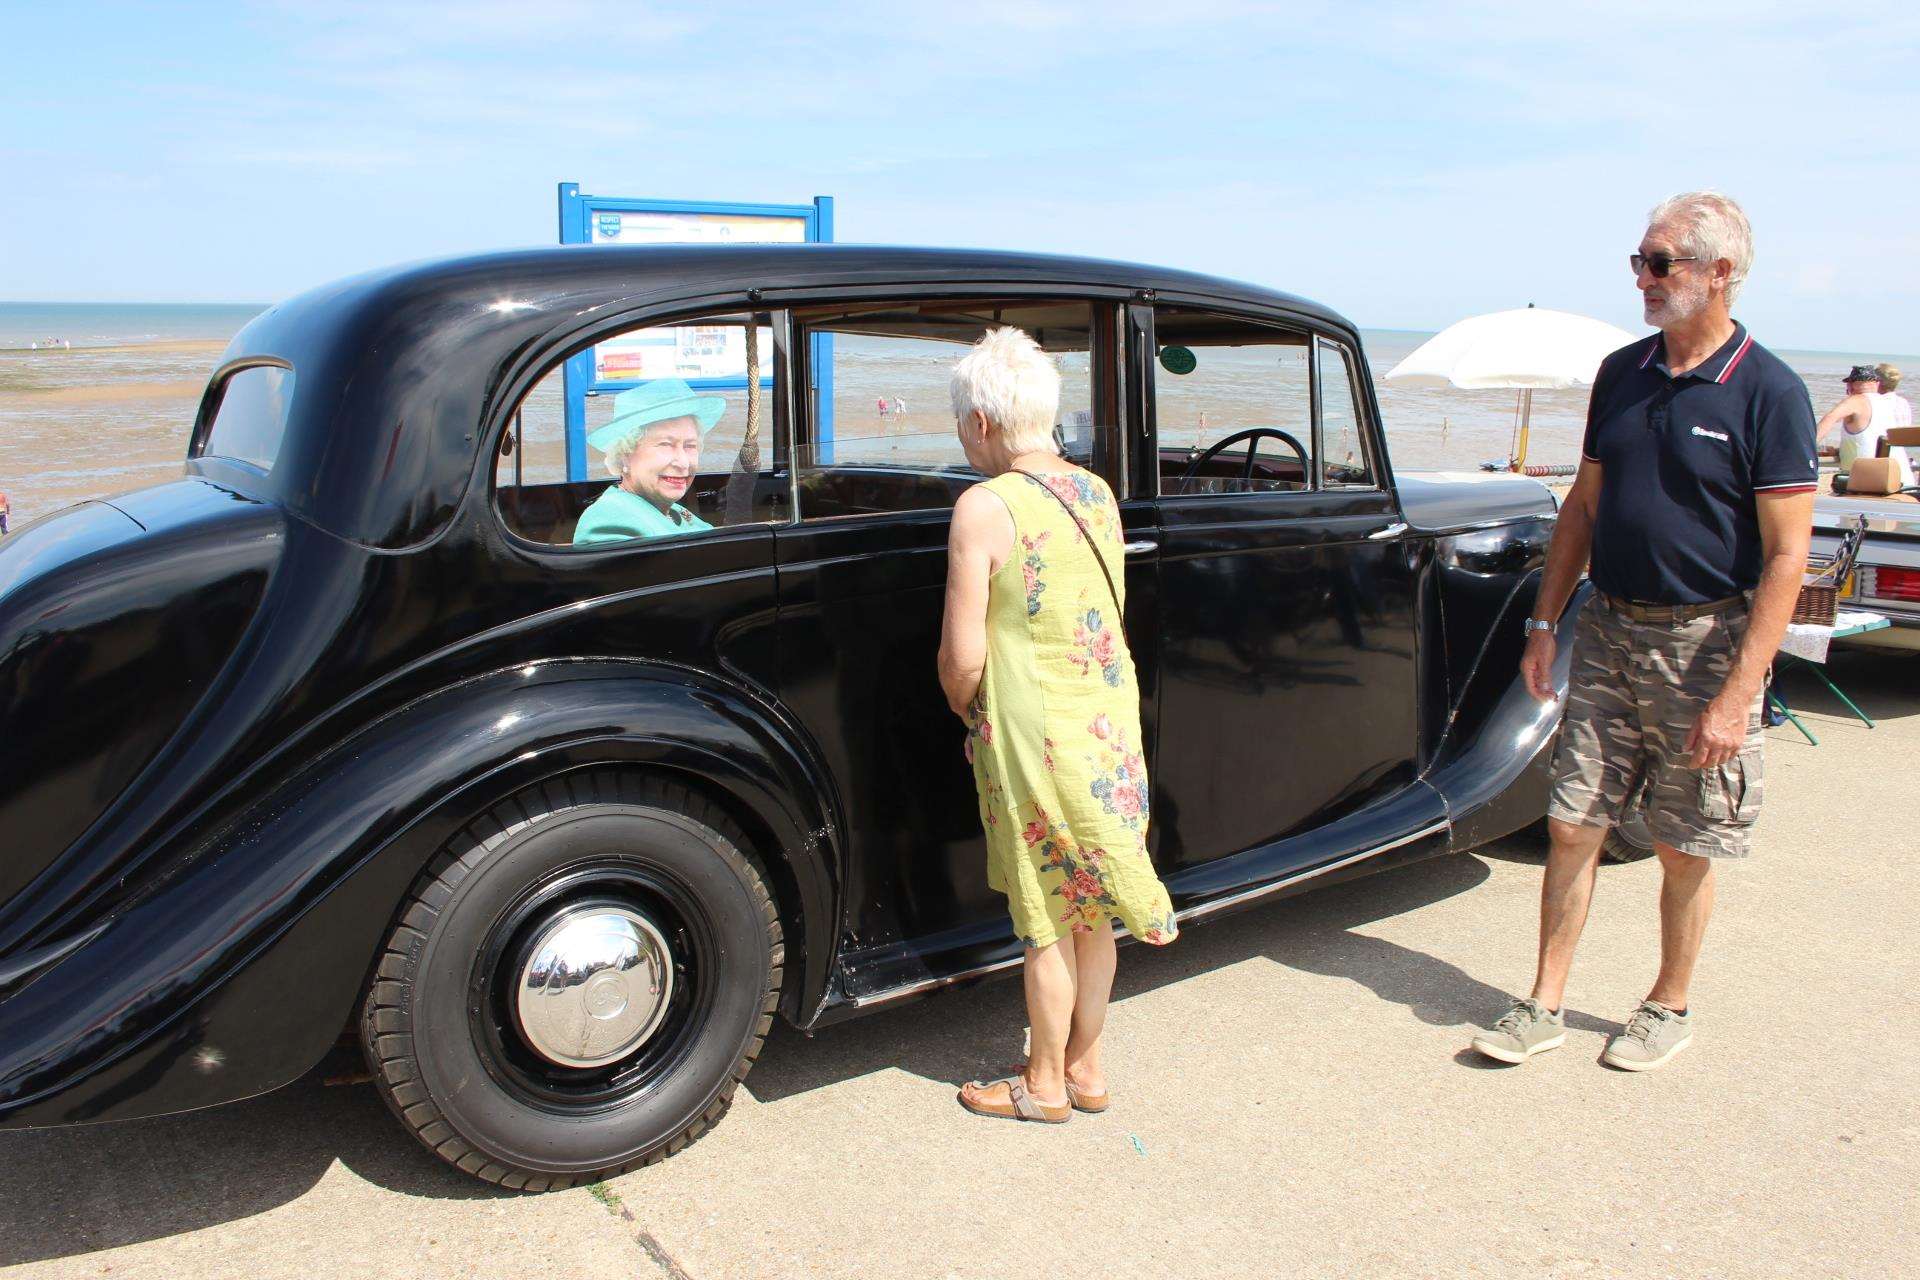 Another top attraction was a 1947 Daimler limousine which was given to Princess Elizabeth and Prince Philip as a wedding present by the RAF. The car, driven by Tom Lambkin of Eastchurch, boasted a colour photo of the Queen in the back seat, which turned heads on the Sheppey seafront at Minster Leas on Sunday (3206611)